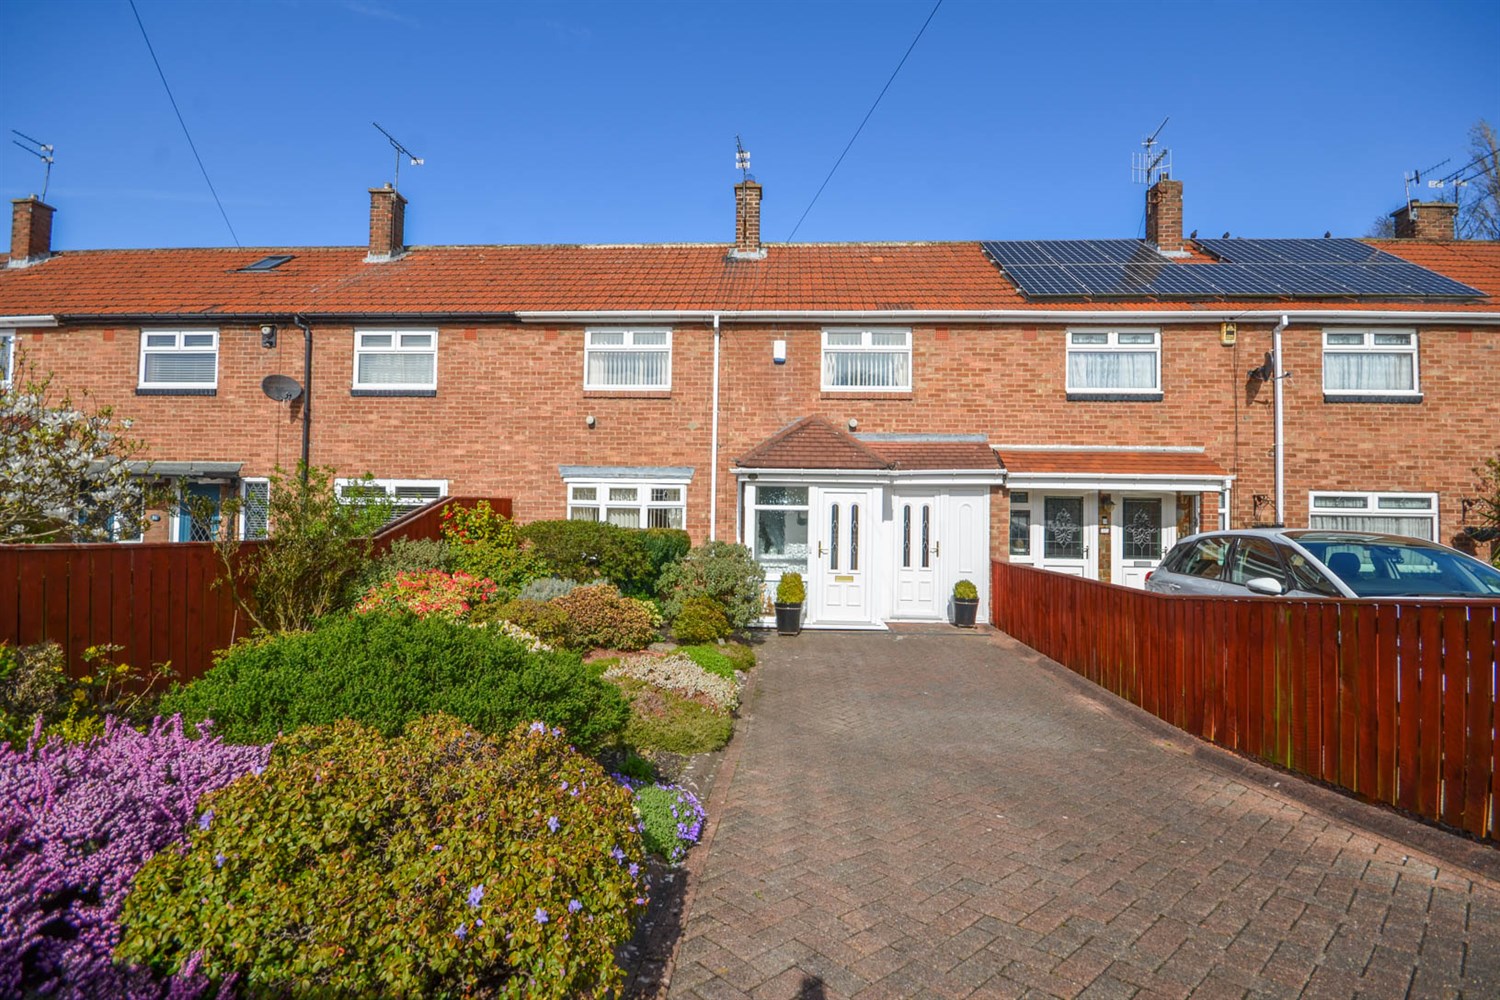 3 bed house for sale in Jubilee Road, Gosforth - Property Image 1